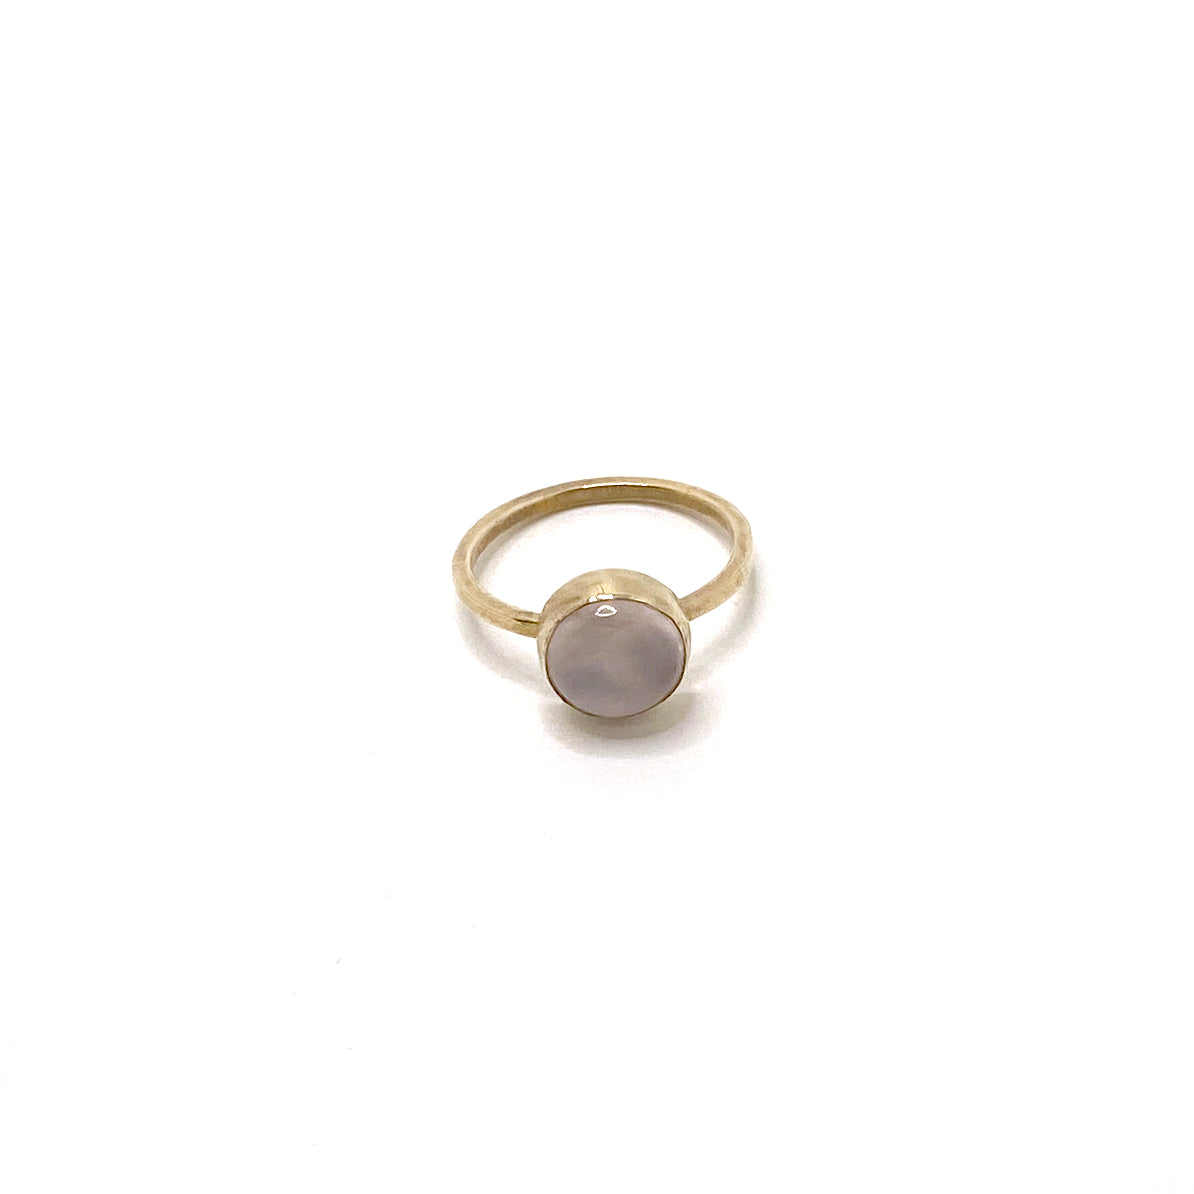 Rose Quartz and Brass Ring Size 5.25